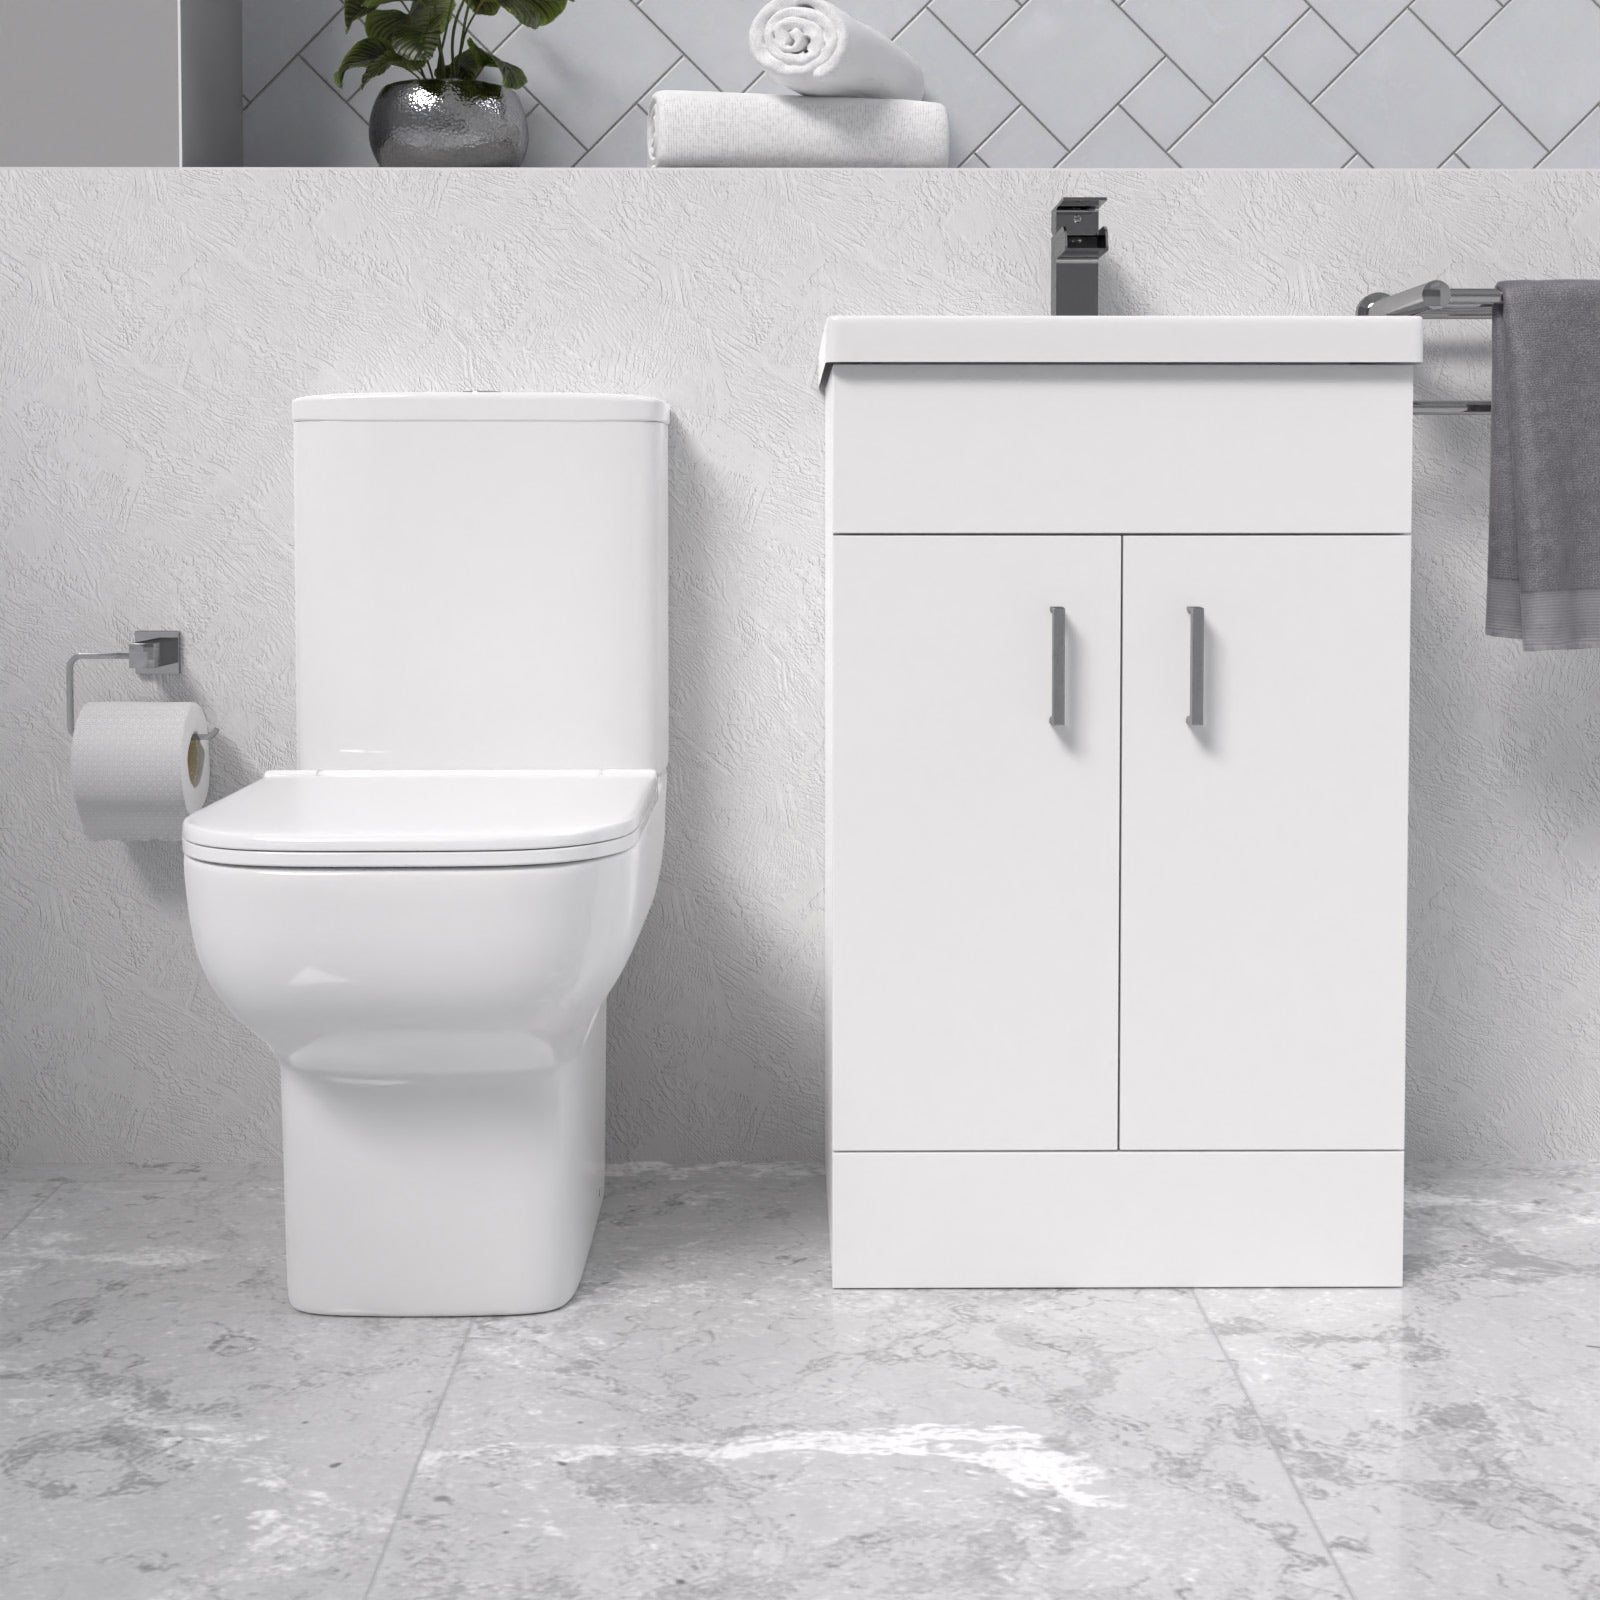 Nanuya White 500mm Cloakroom Suite with Basin Vanity and Close Coupled Toilet